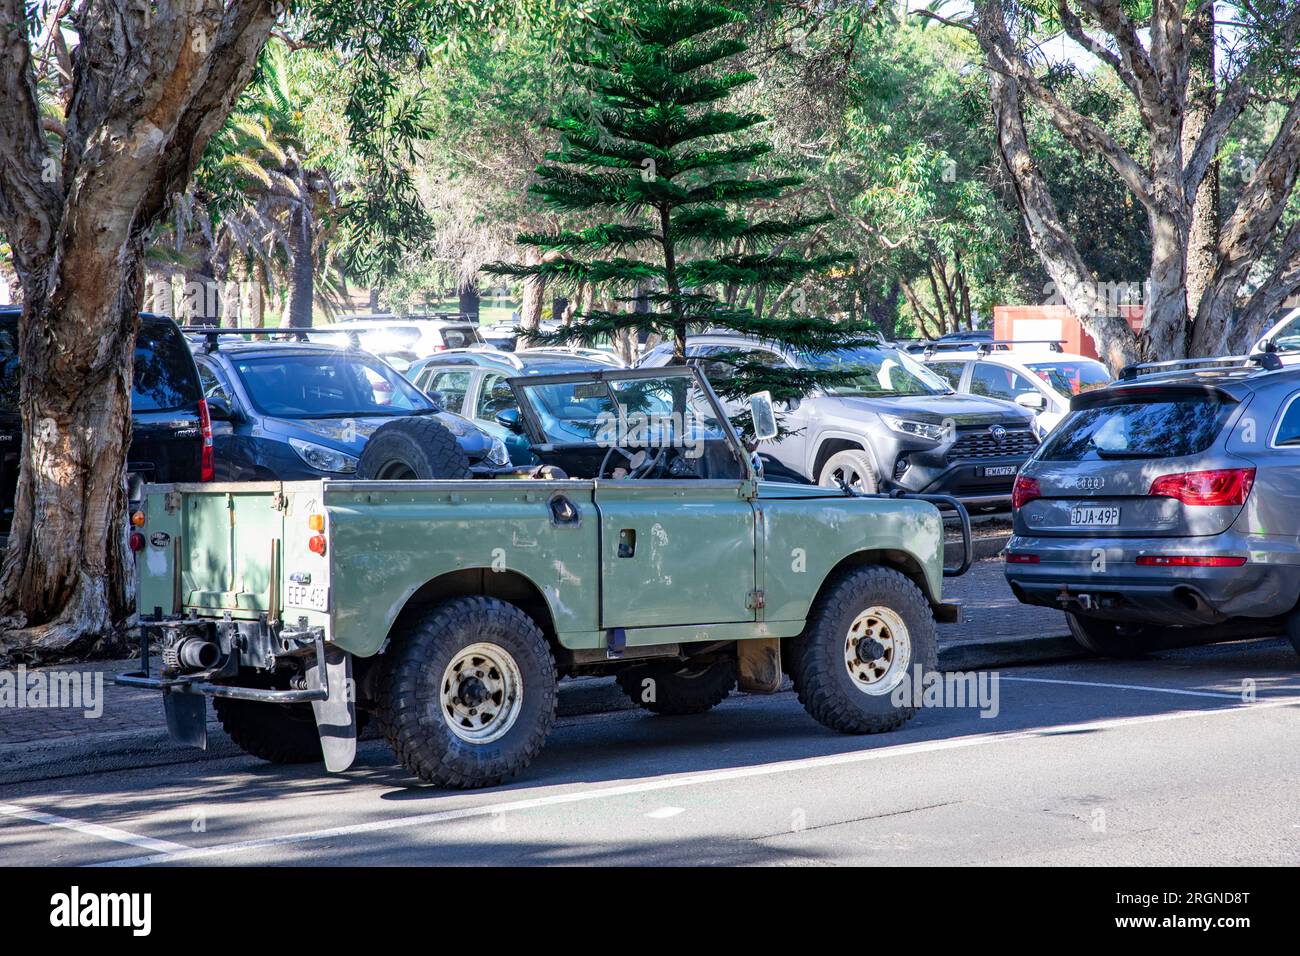 1972 Series 2 Land Rover Defender parked in Sydney Australia, right hand drive with no roof so fully open top Stock Photo